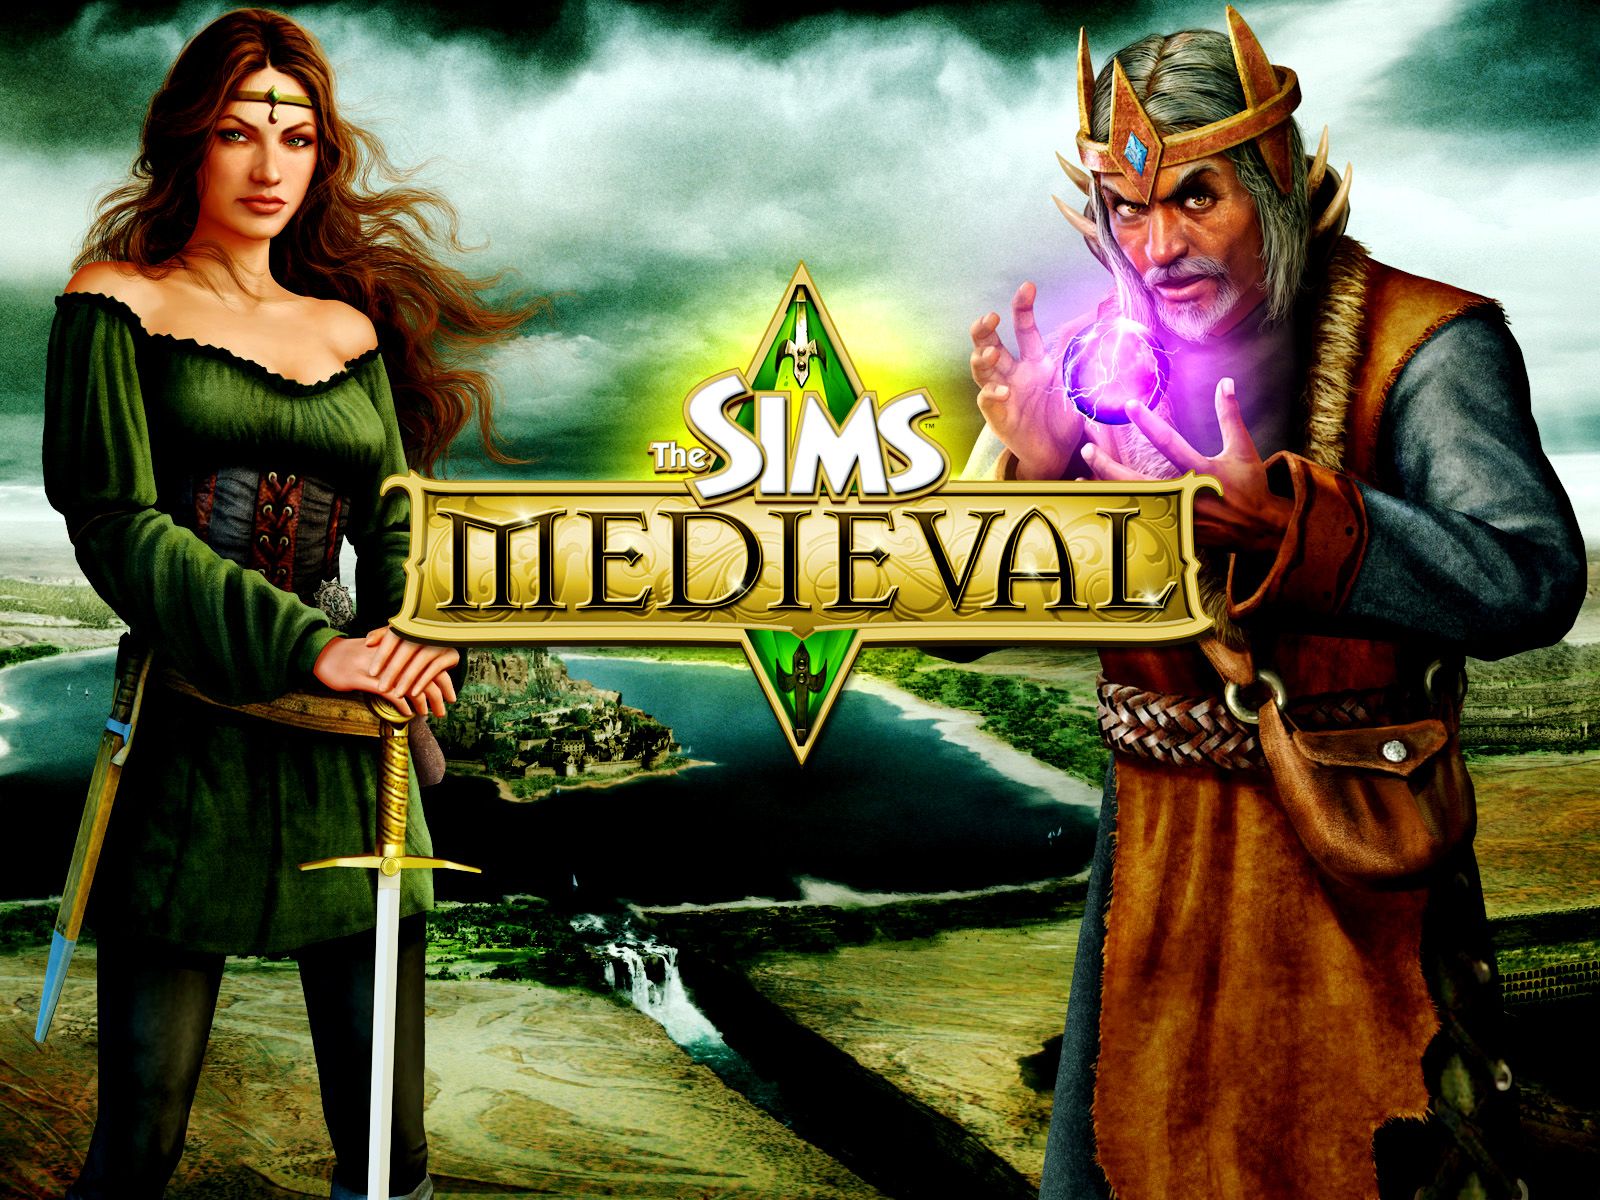 sims medieval game of thrones